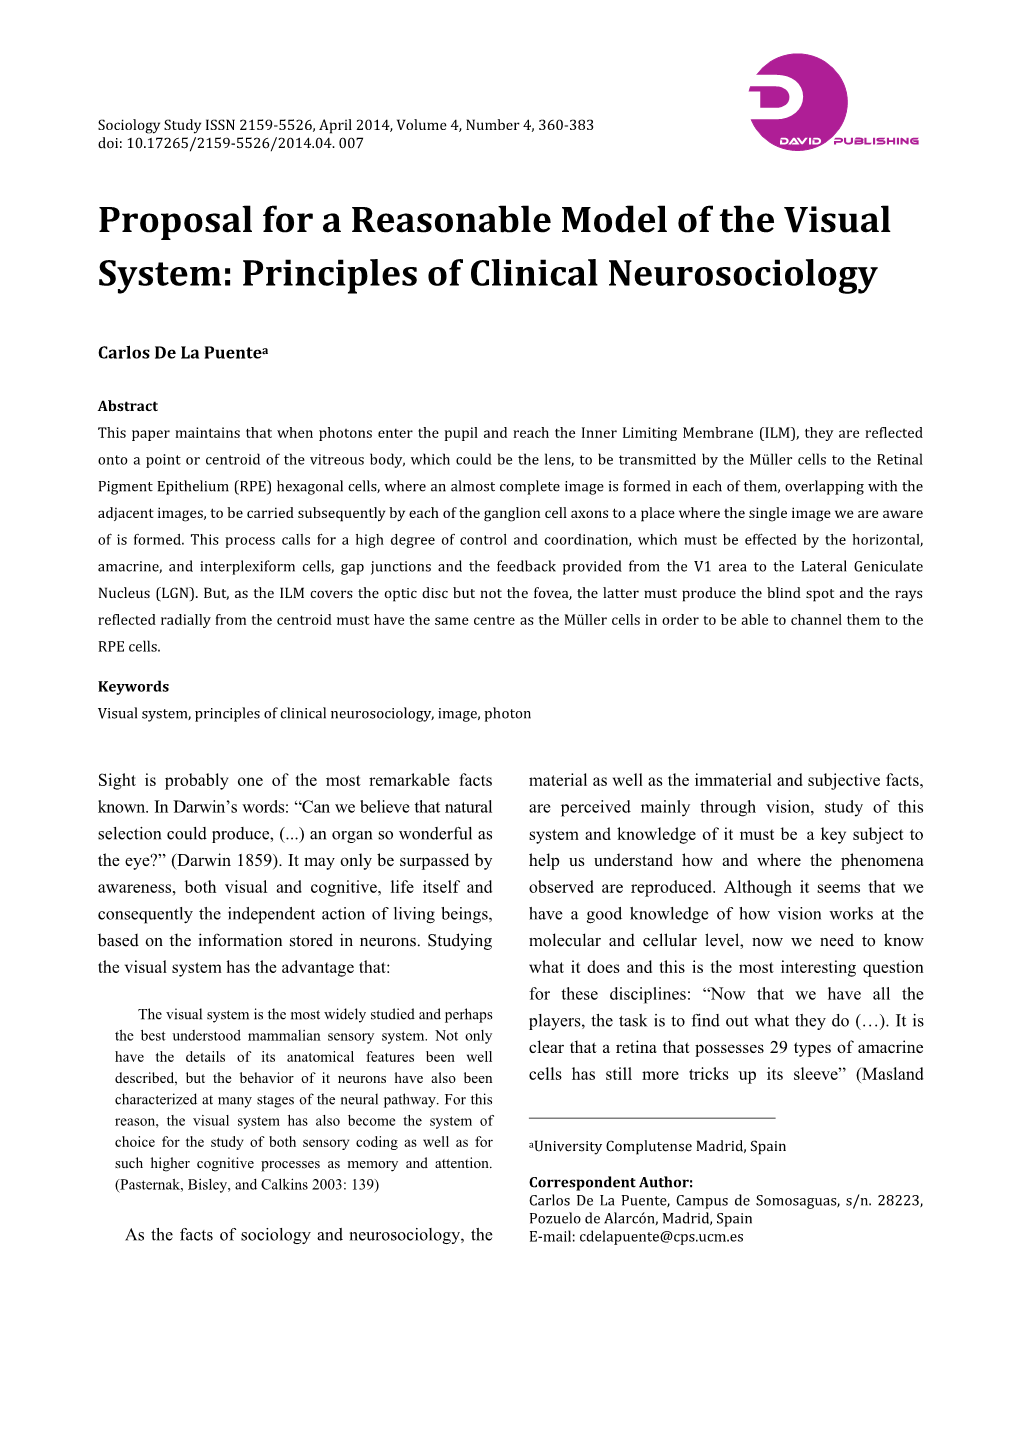 Proposal for a Reasonable Model of the Visual System: Principles of Clinical Neurosociology